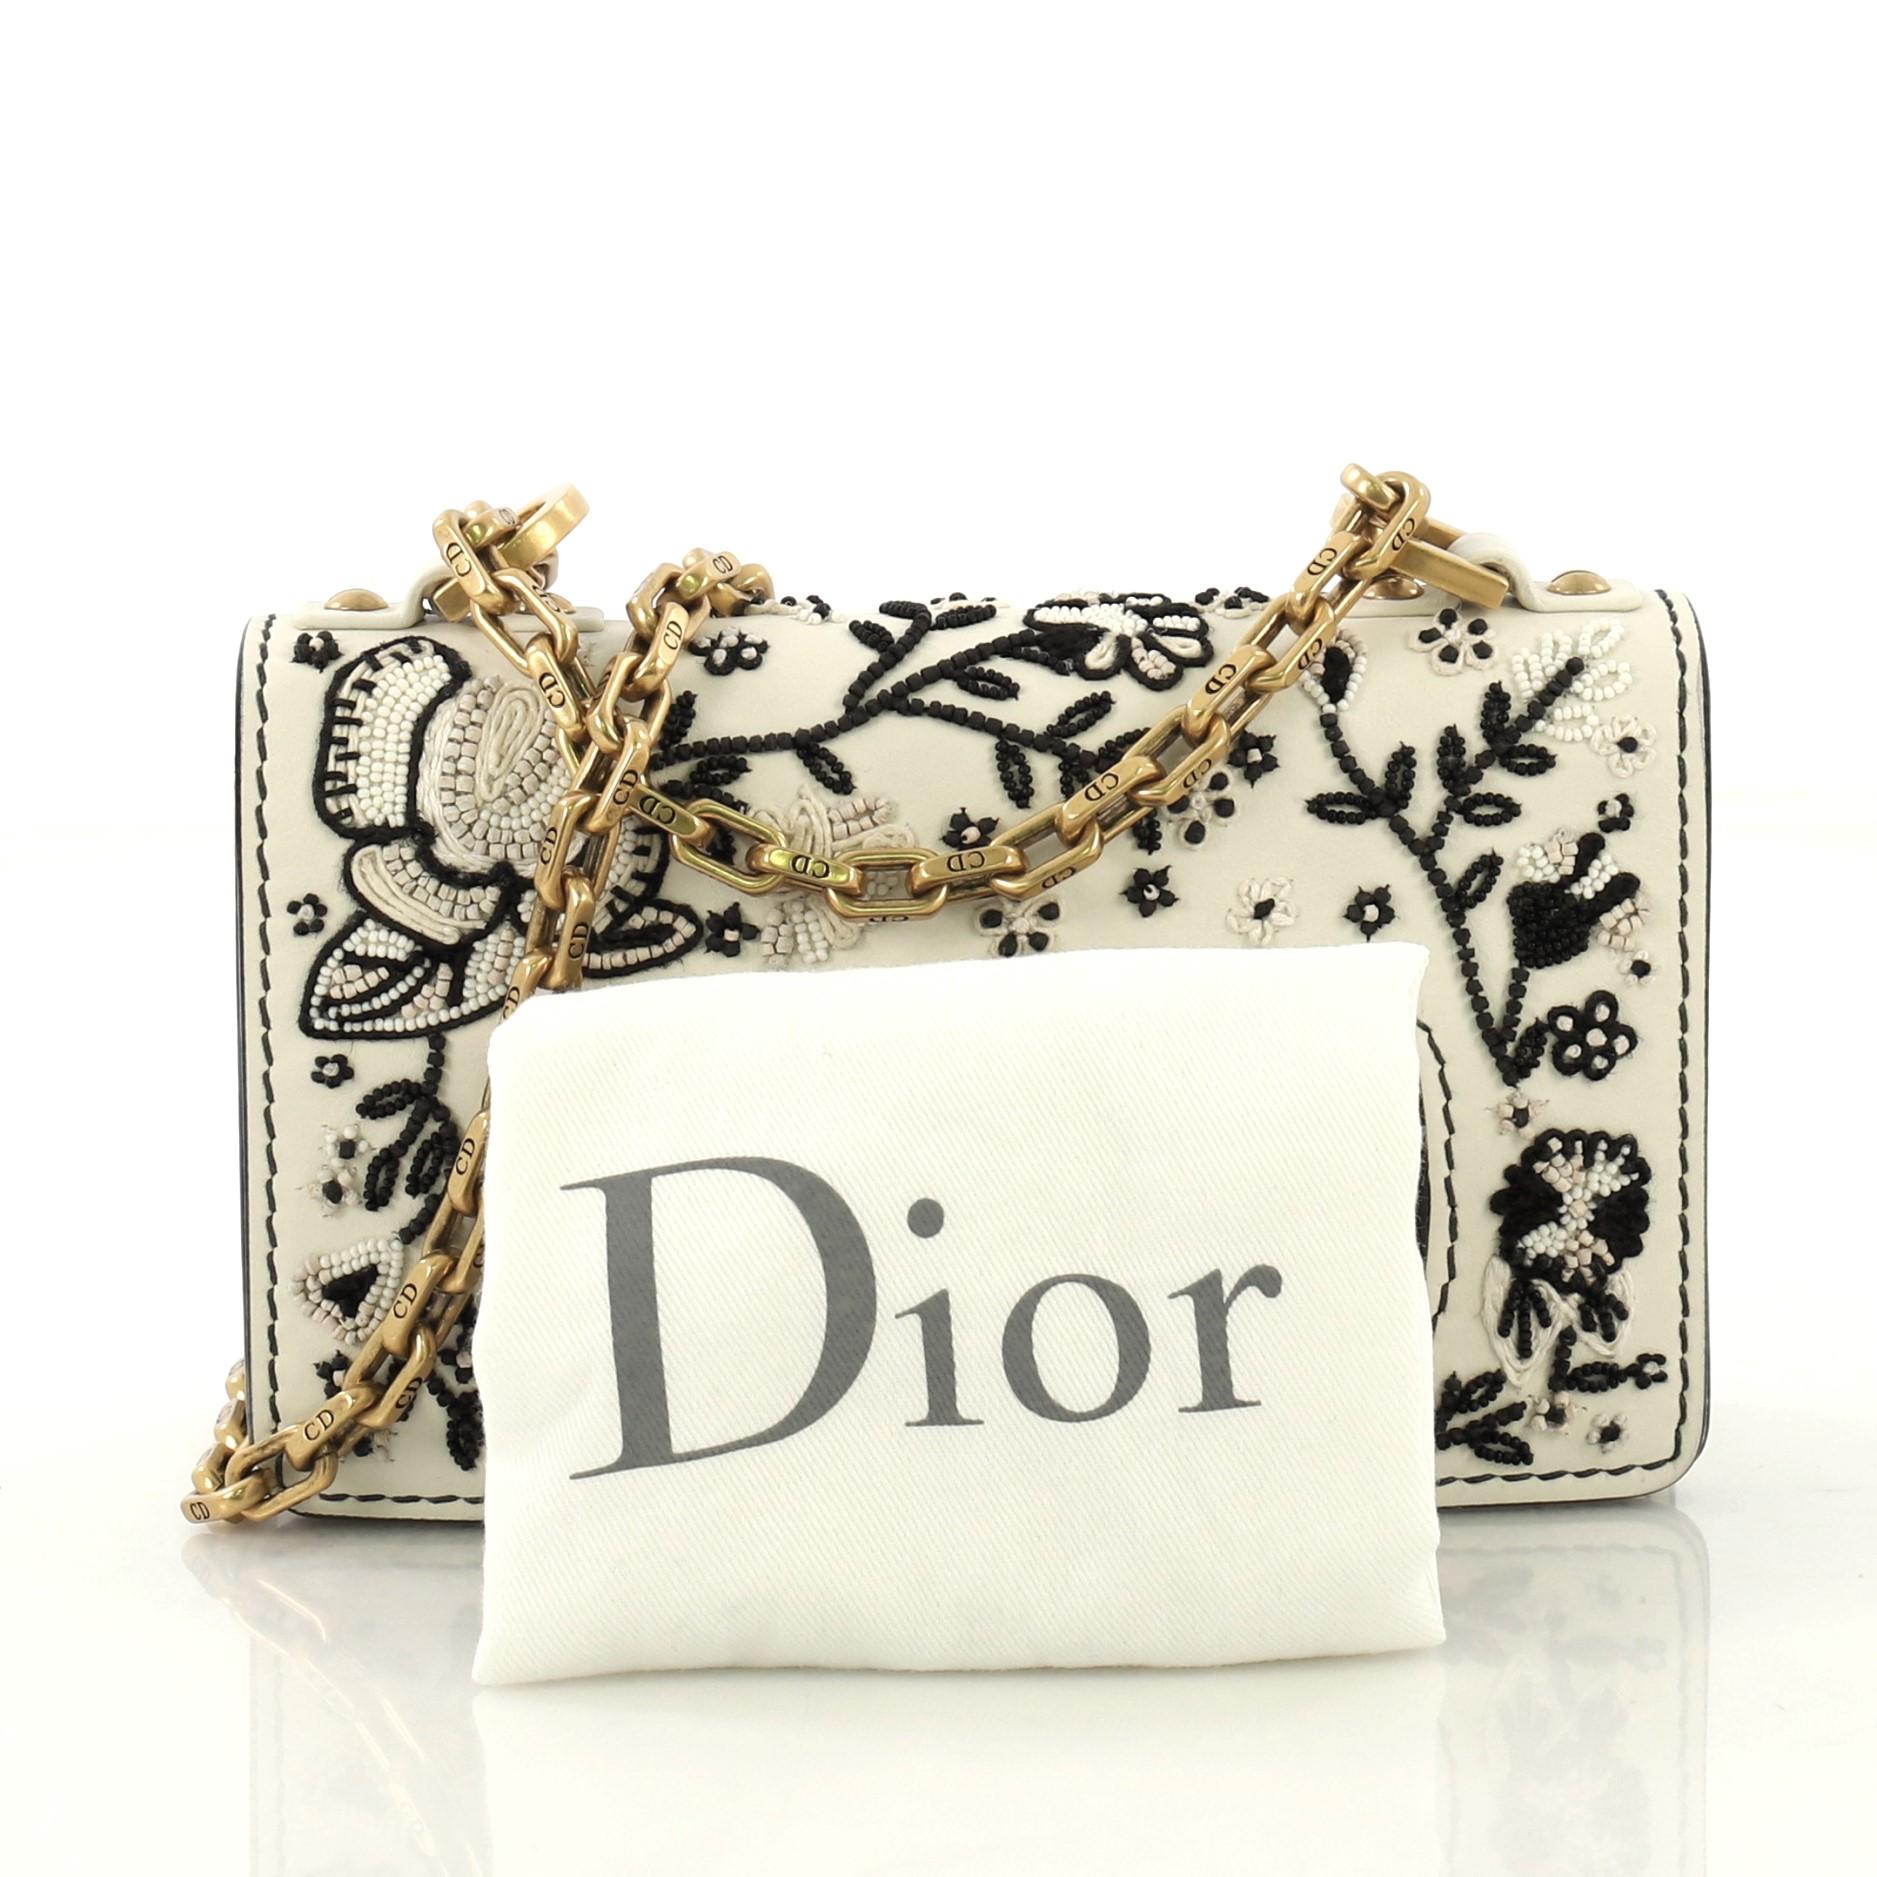 This Christian Dior J'adior Flap Bag Embellished Leather Mini, crafted from white embellished leather, features chain link strap, slot handclasp with metal plated J'adior signature, and aged gold-tone hardware. Its flap opens to a white suede